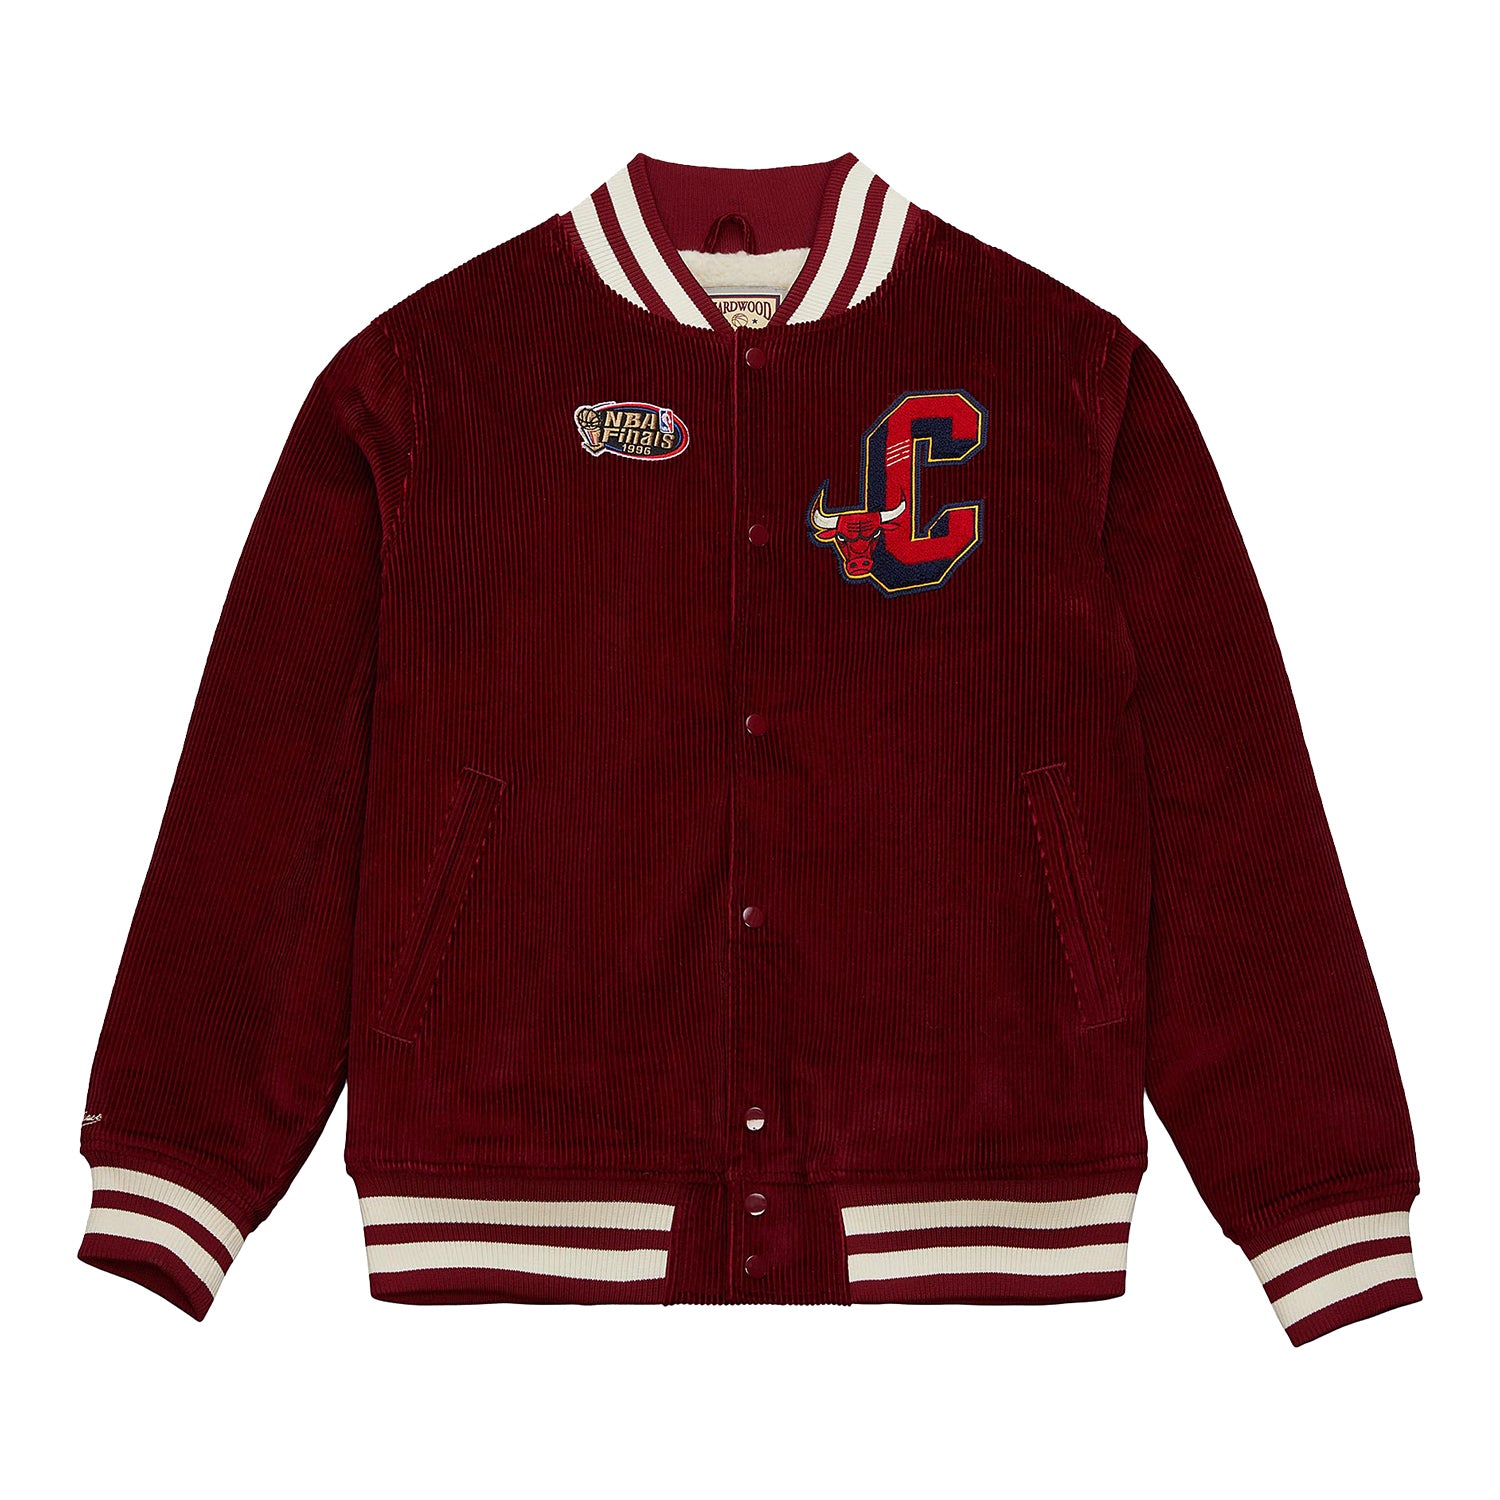 Chicago Bulls Mitchell & Ness Collegiate Varsity Jacket in red - front view